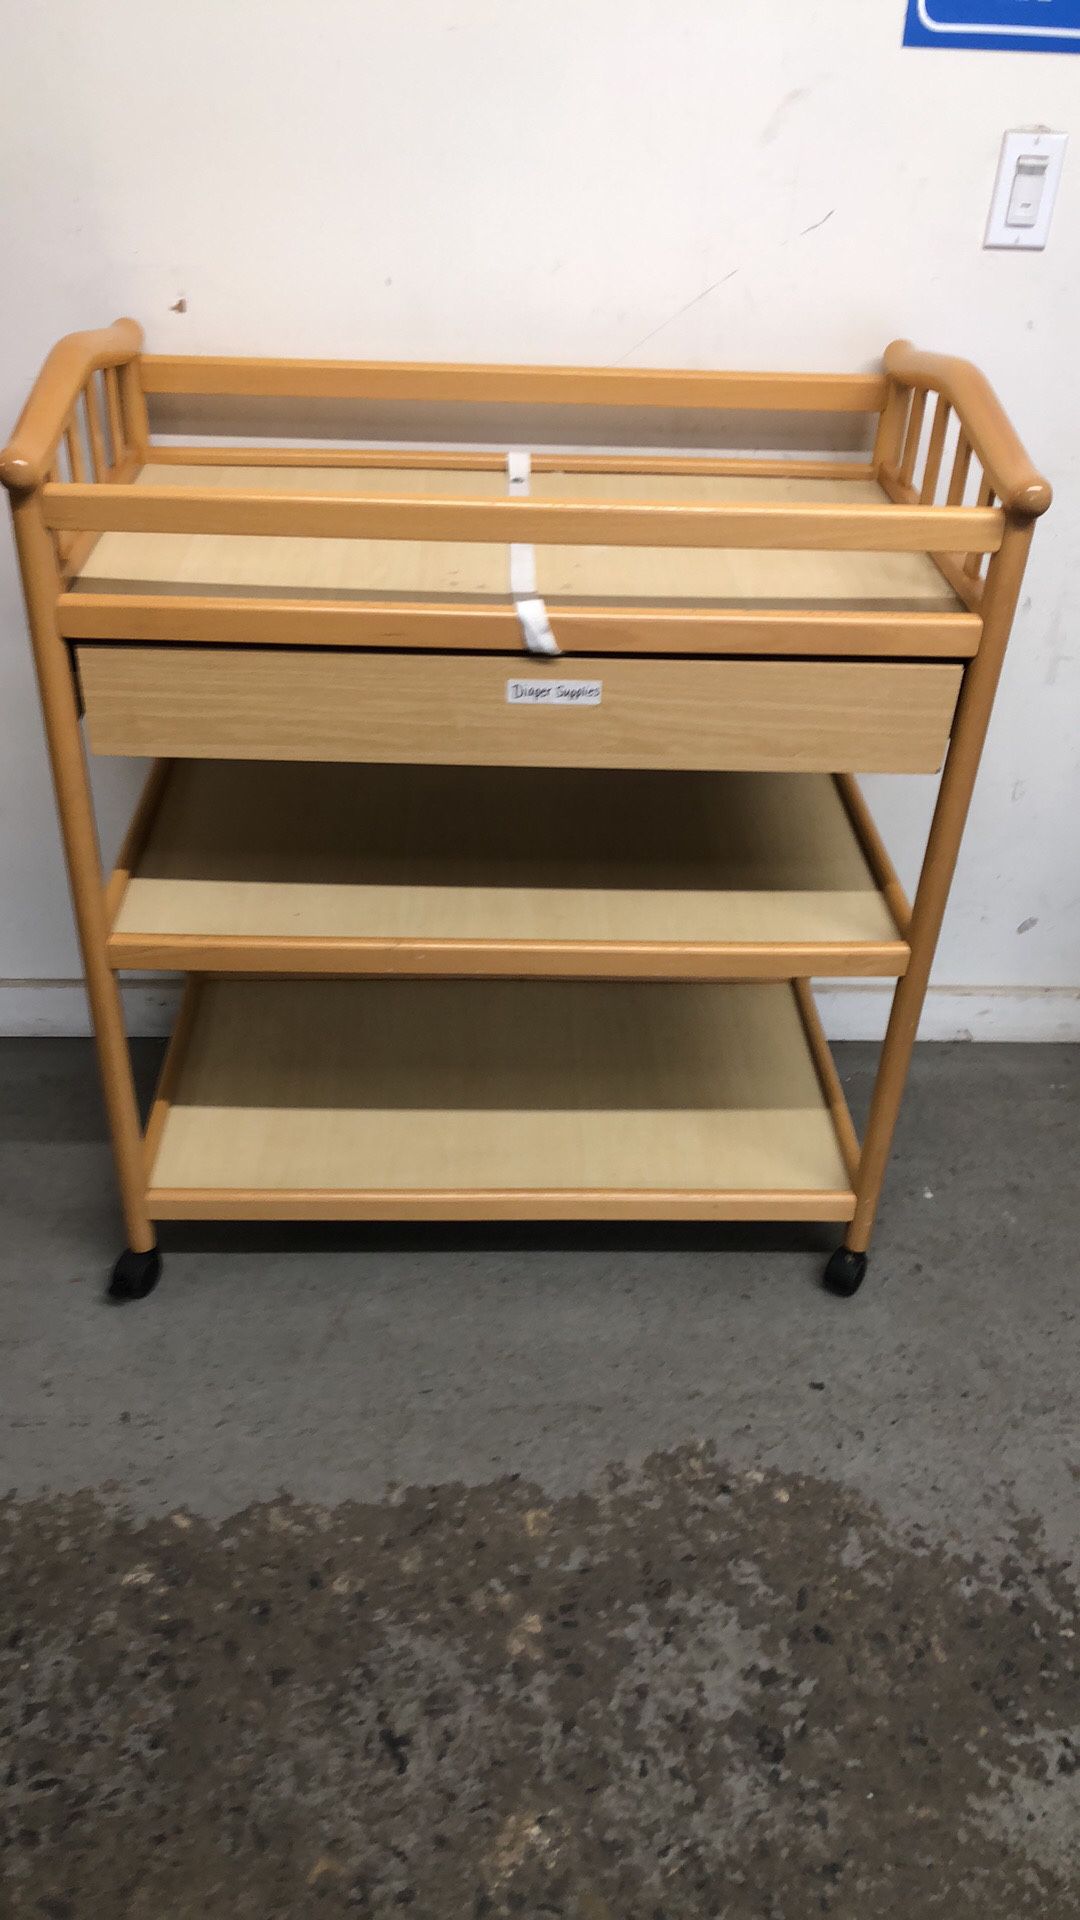 36”wx18”dx39”h Baby changing table